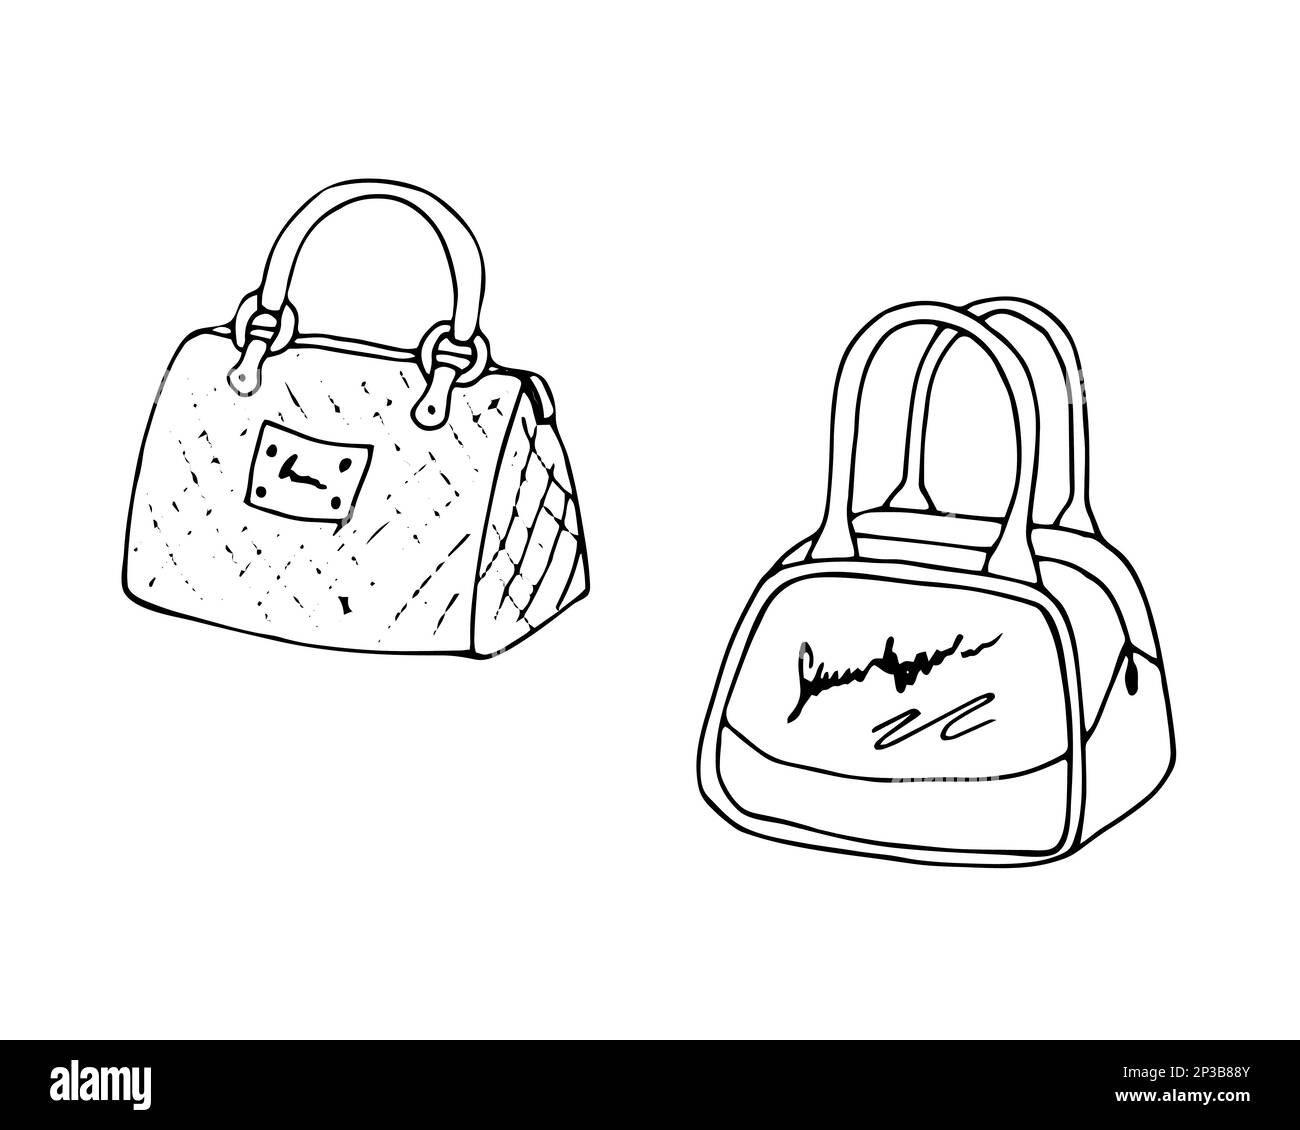 Hand-drawn 2 bags, isolated on white background. Vector illustration ...